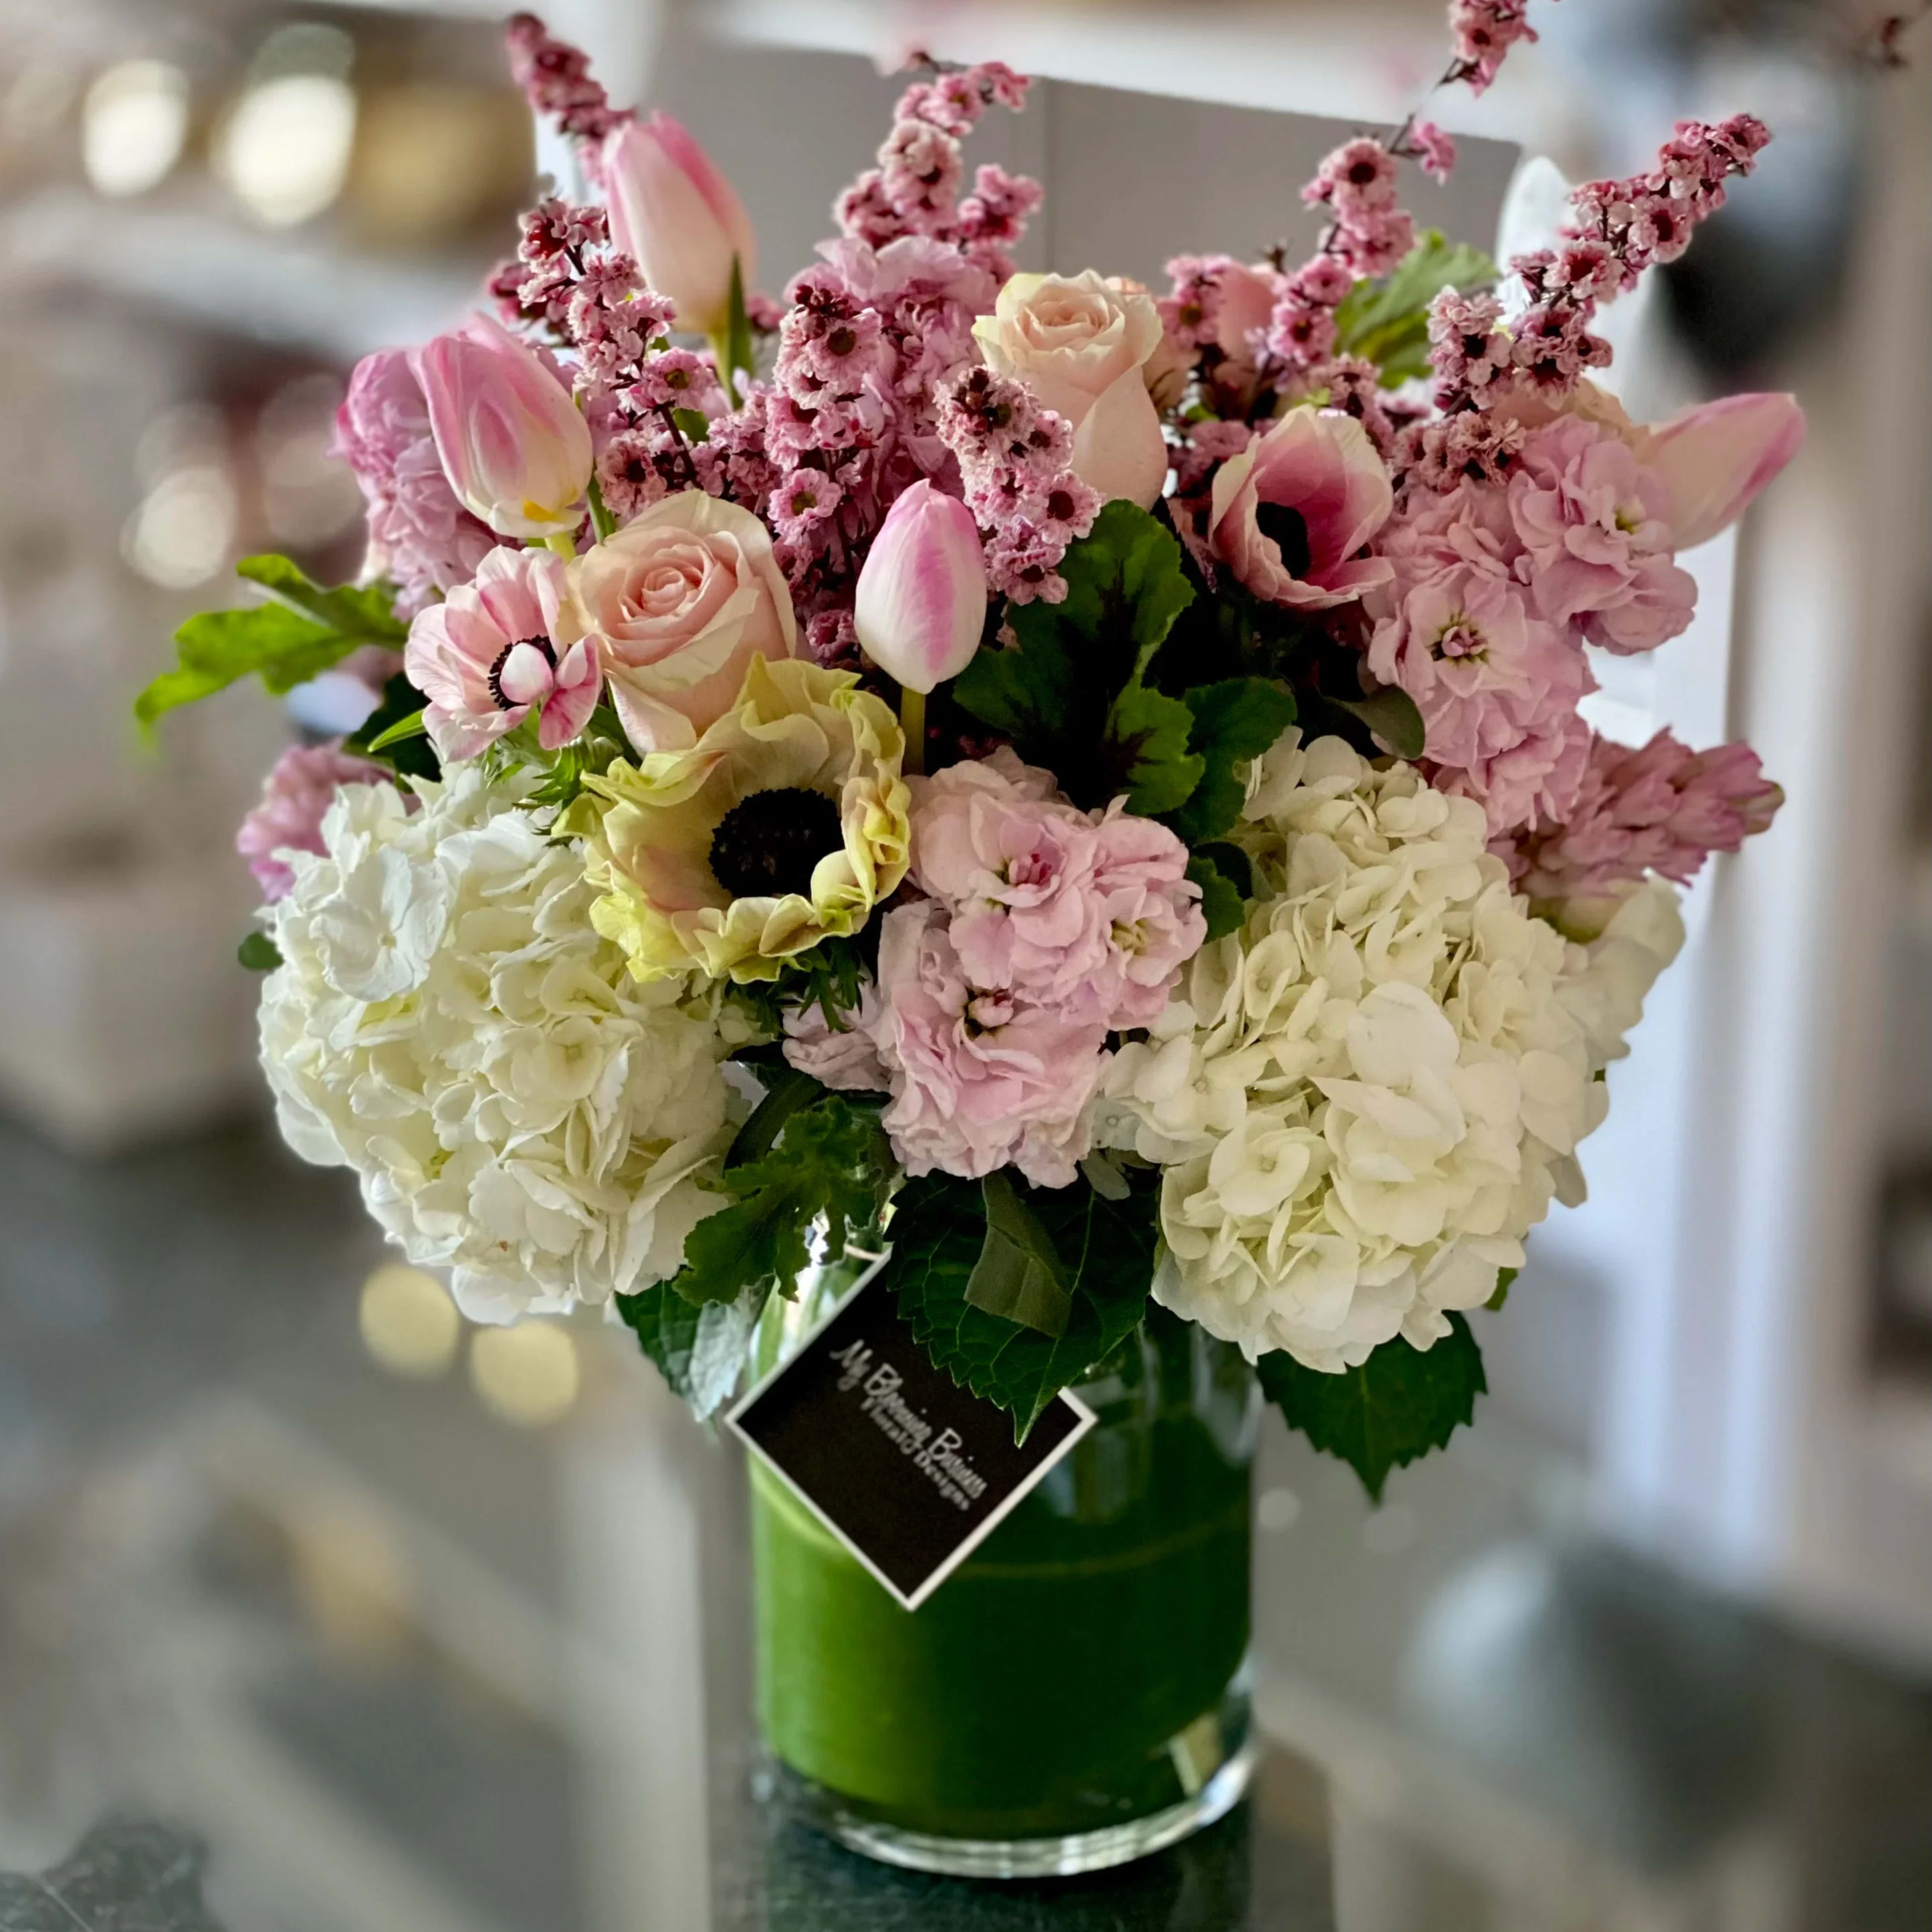 Express Yourself  - Do you want to let someone special know how you feel without saying a word? With the Express Yourself arrangement, you can do just that! This beautiful, luscious pink spring style arrangement will make them feel loved and appreciated. The mix of pink stock, tulips, roses, and anemones in a classic vase is the perfect way to show someone in your life how much you care. So don’t just say it, express it with the Express Yourself arrangement. It’s the perfect gift for any occasion!